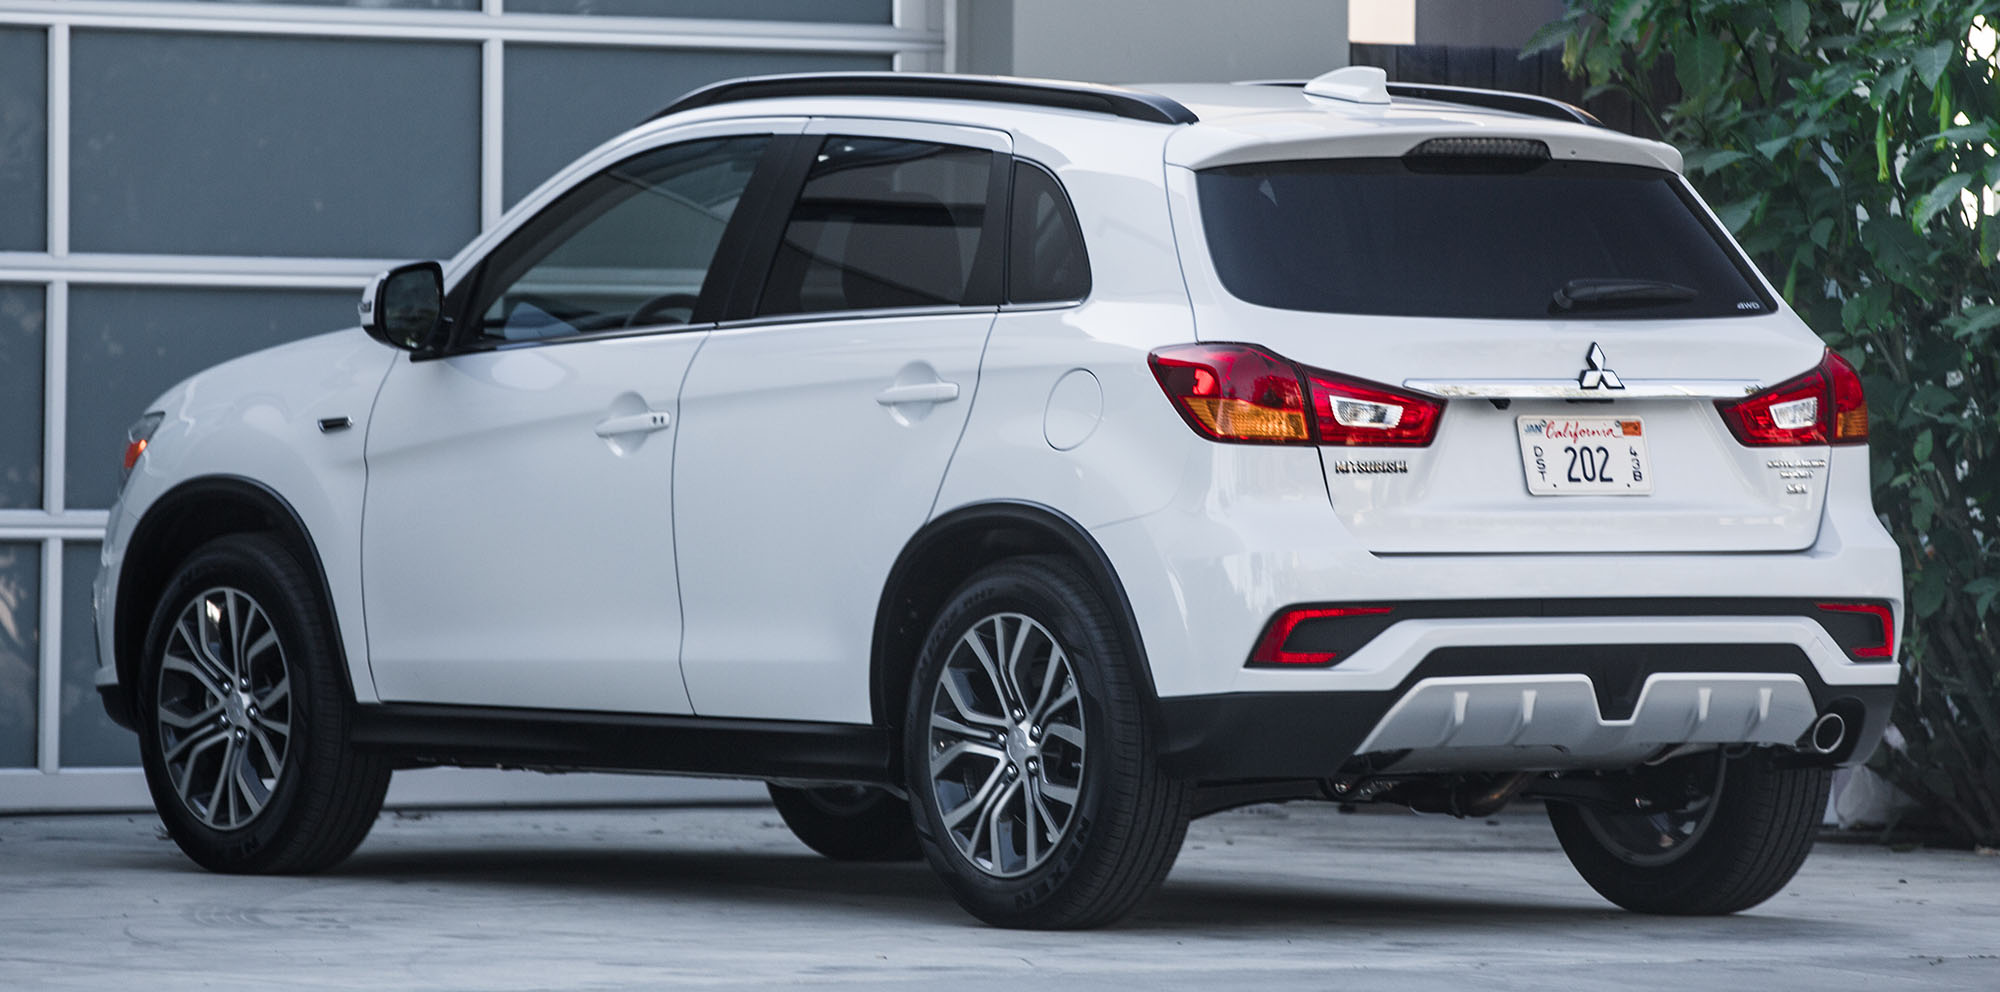 2018 Mitsubishi ASX update revealed in the USA  Photos 1 of 4